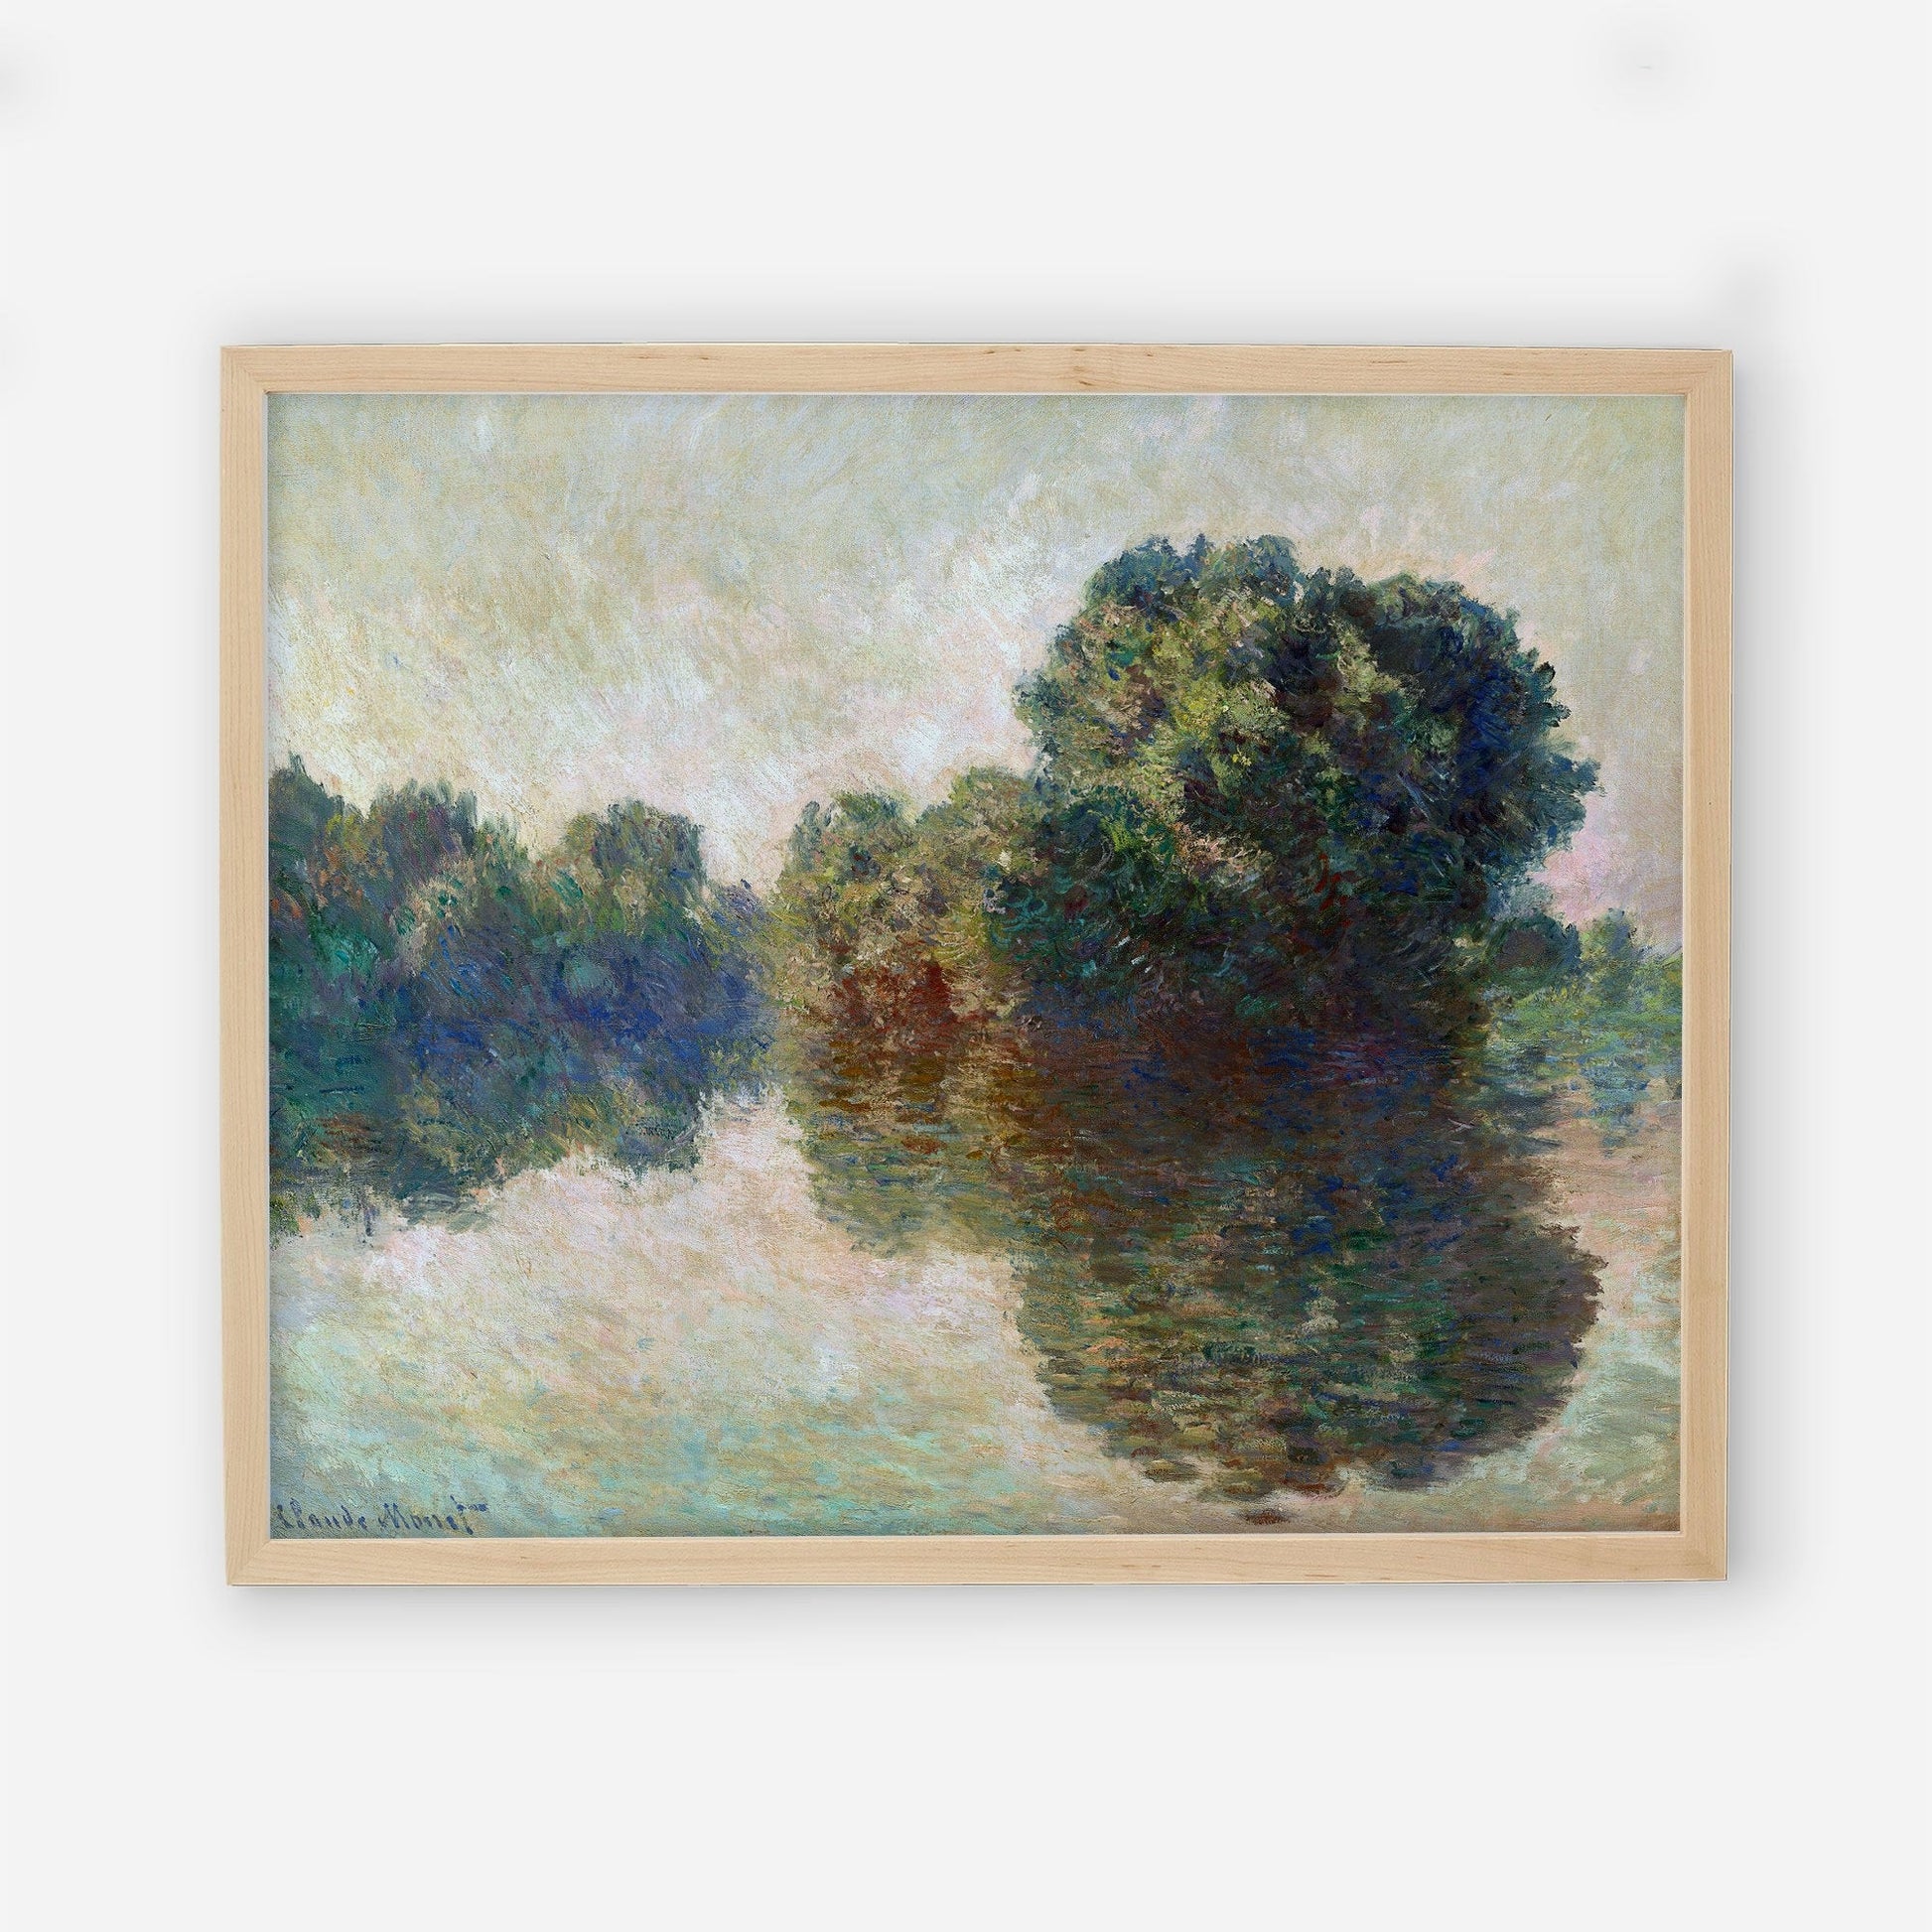 Vintage Landscape Wall Art - Farmhouse Oil Replica - Printed and shipped to you on fine art paper